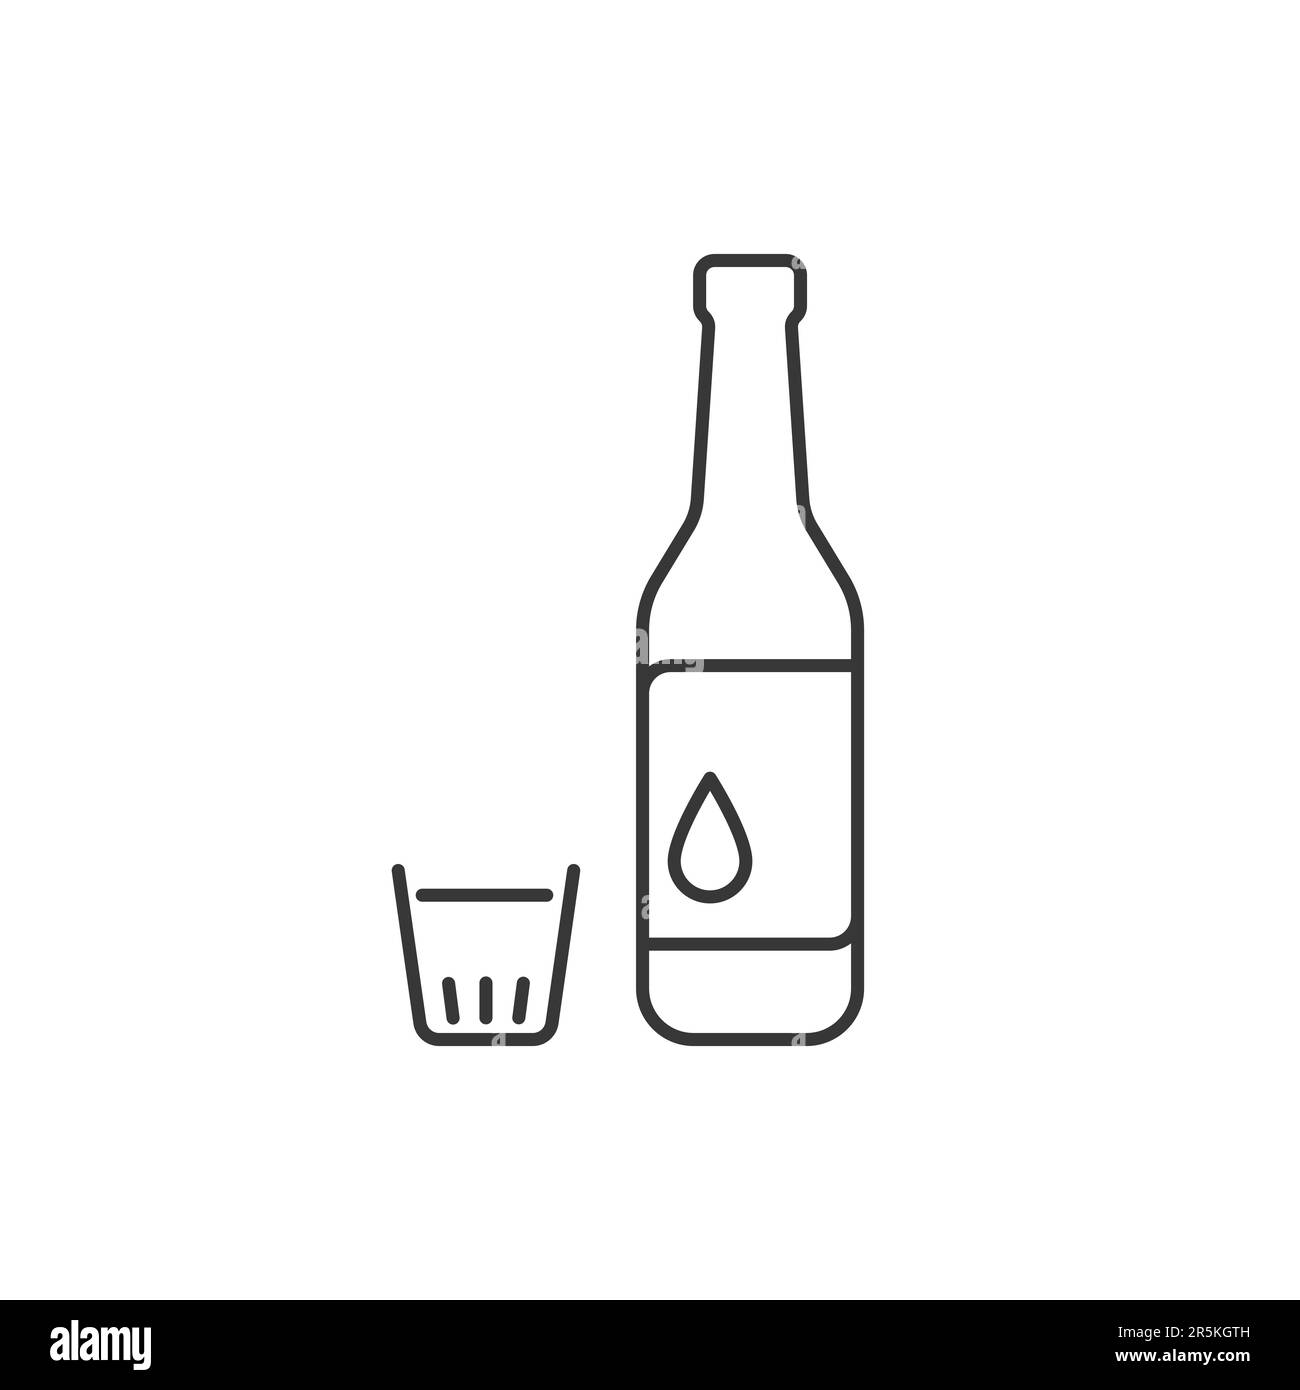 Soju bottle with glass Vector minimal icon. It is a famous clear, colorless distilled beverage of Korean origin Stock Vector